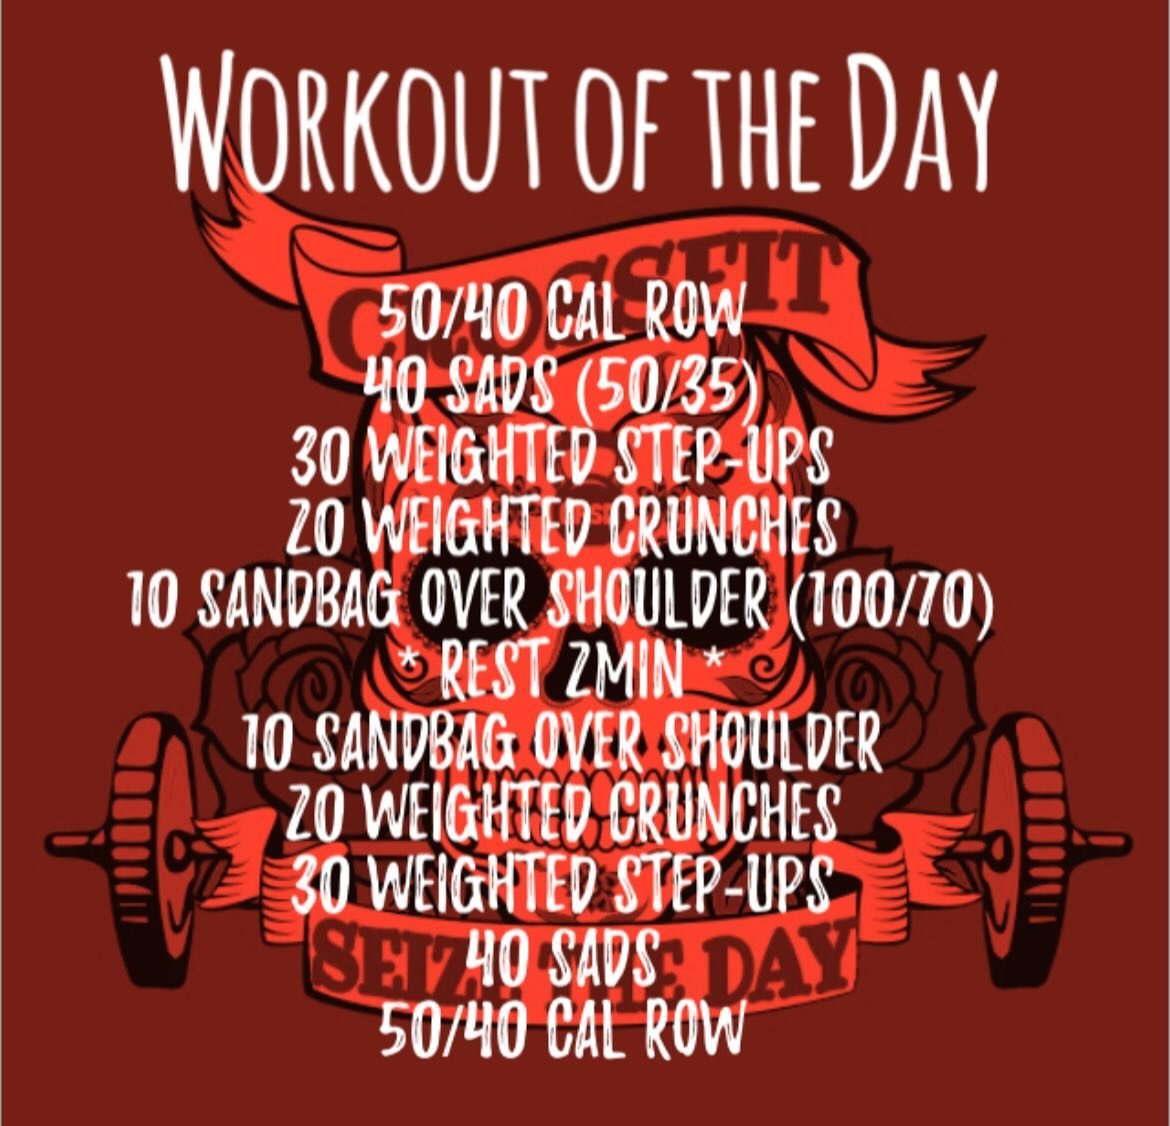 Monday, May 6, 2024
50/40 cal row 40 SADS (50/35)
30 Weighted Step-ups
20 Weighted Crunches 10 Sandbag over Shoulder (100/70) * Rest 2min * 
10 Sandbag over Shoulder
20 Weighted Crunches
30 Weighted Step-ups
40 SADS
50/40 cal row